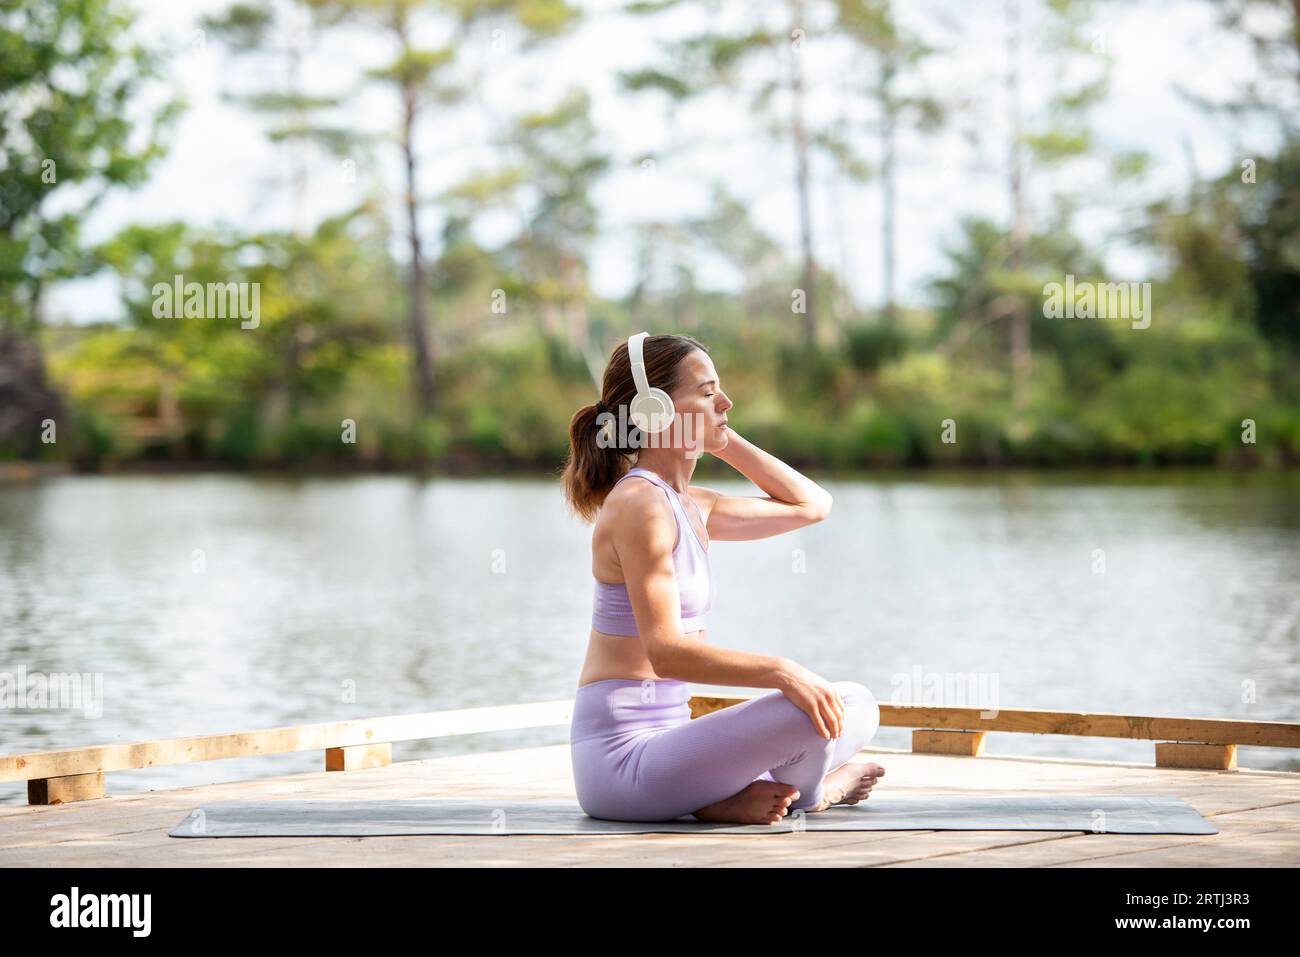 Sporty woman sitting on a jetty by a lake, resting after exercise listening to music on headphones, part of series. Stock Photo